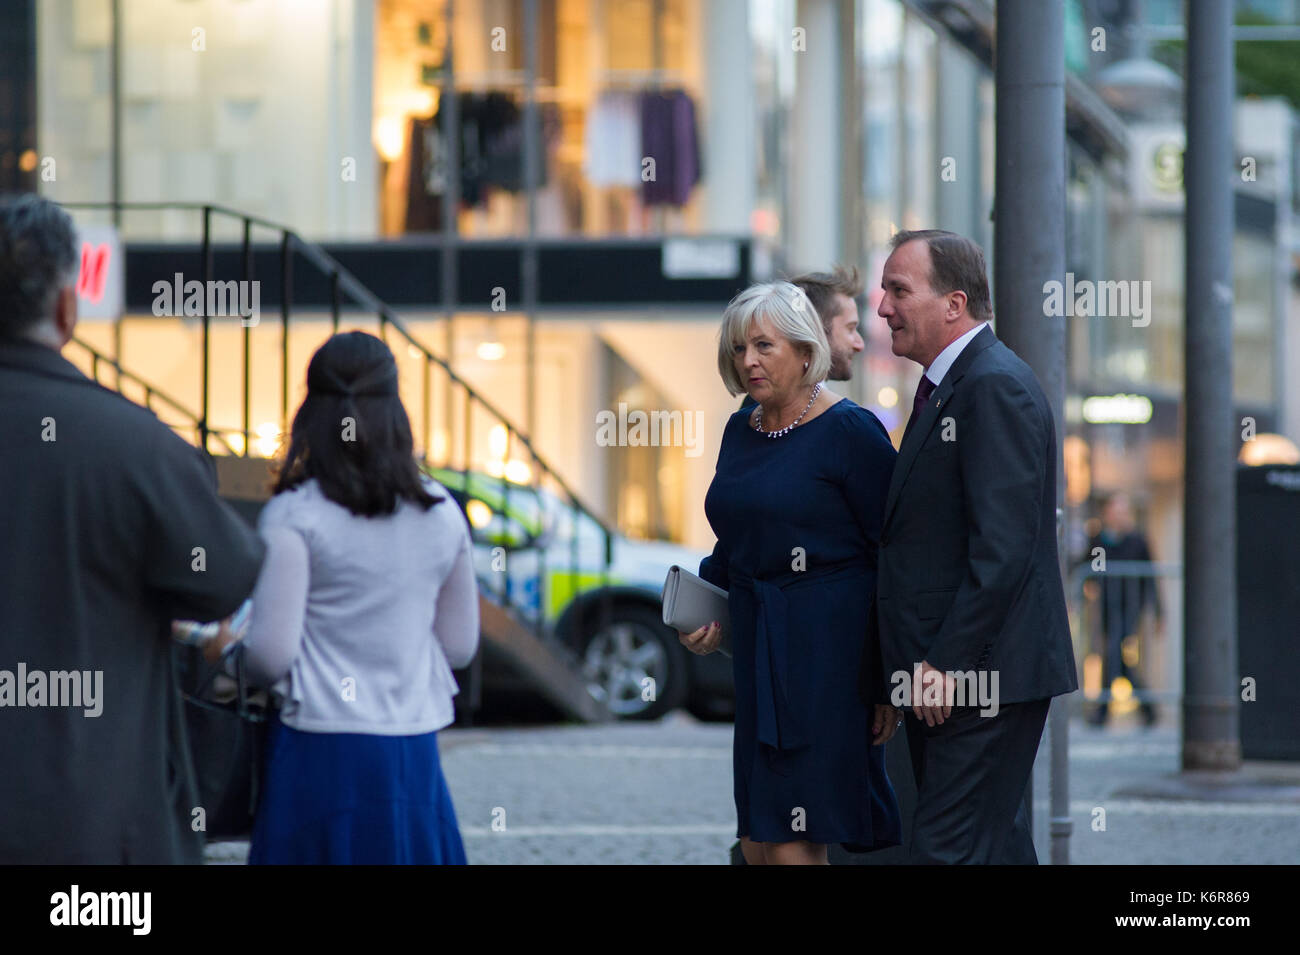 Stockholm, Sweden, 12th September, 2017. Opening of the Riksdag. Tonights concert at Stockholm Concert Hall, due to the opening of the Riksdag. PM Stefan Lofven (S) and his wife Ulla Lofven arrives.Credit: Barbro Bergfeldt/Alamy Live News Stock Photo